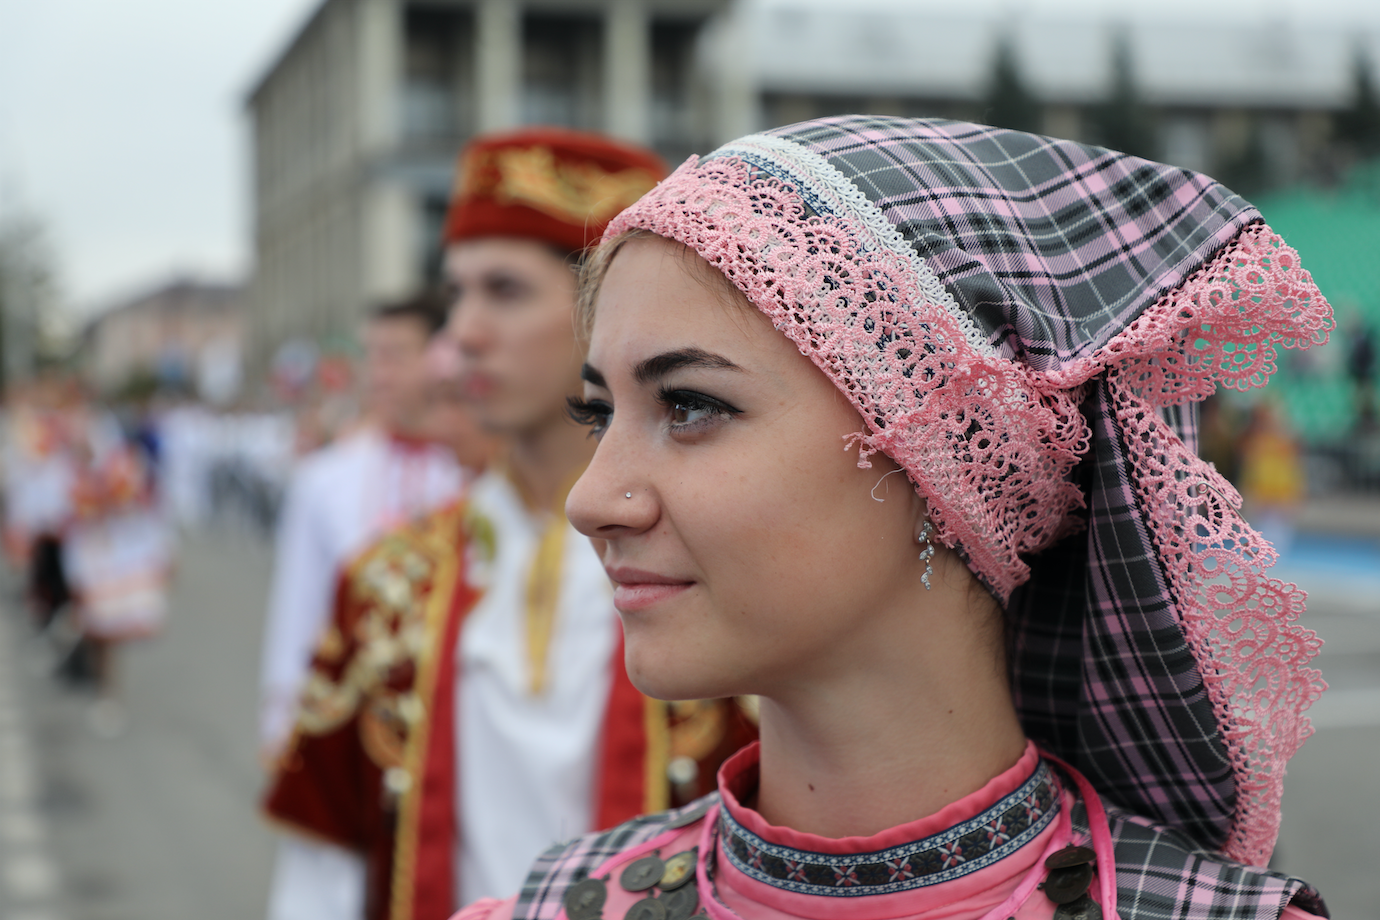 On Oilman's Day in Tatarstan,Russia, a women stands in the national clothing. September, 2018. Tatarstan, Russia. Image by Denis Gaponov /Shutterstock.